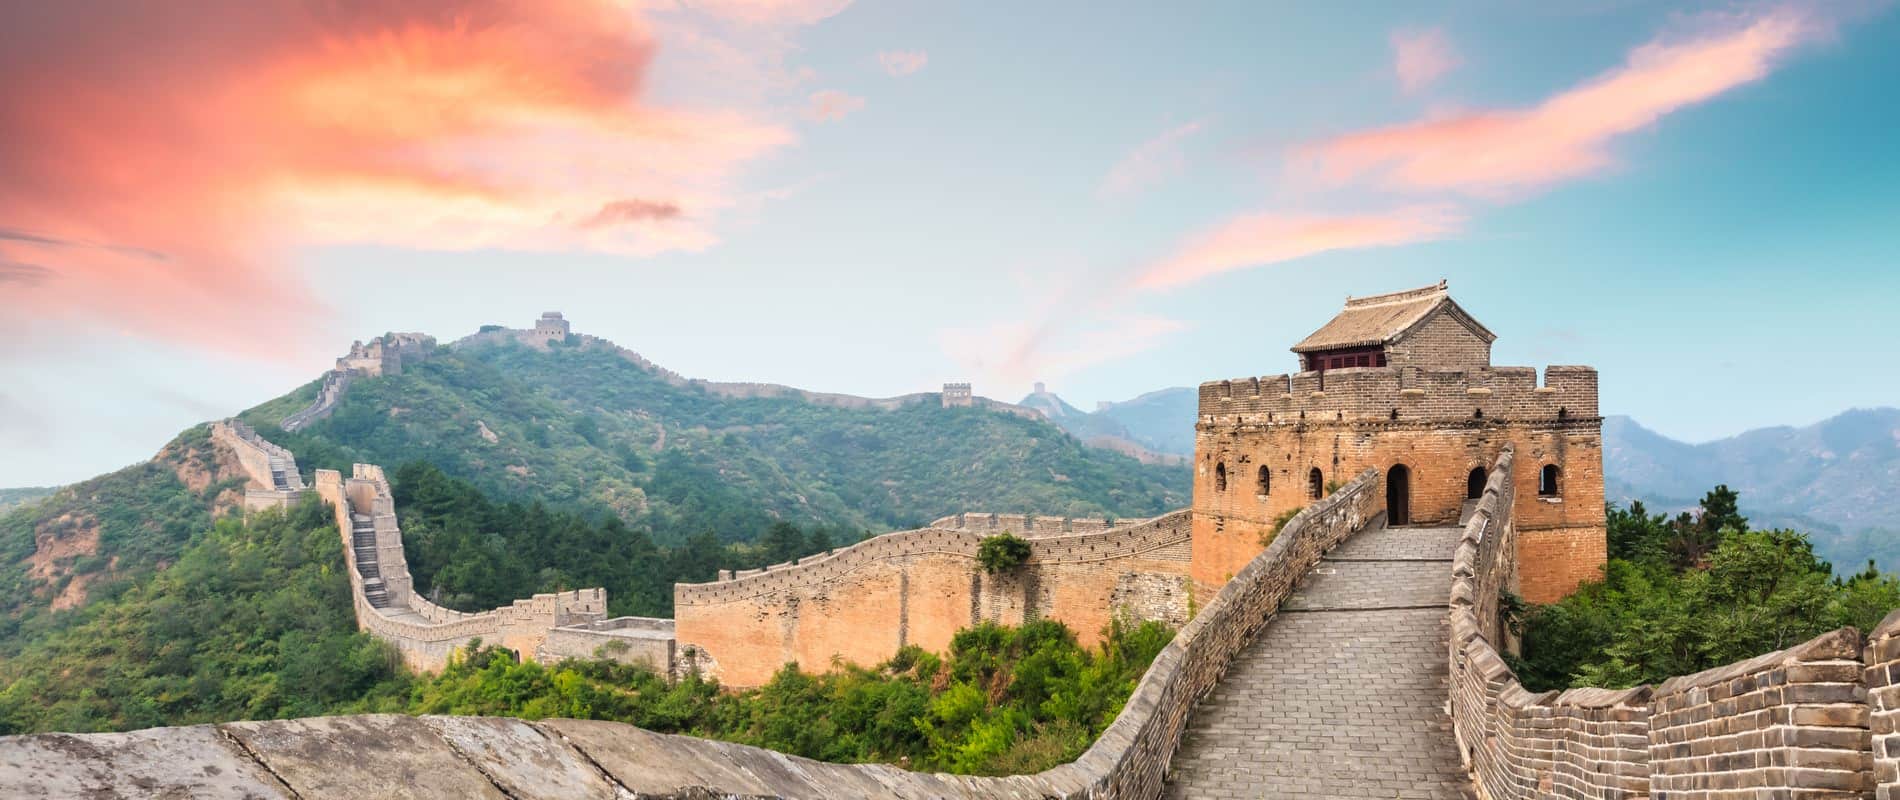 Beautiful view of the Great Wall of China amidst blue and pastel skies